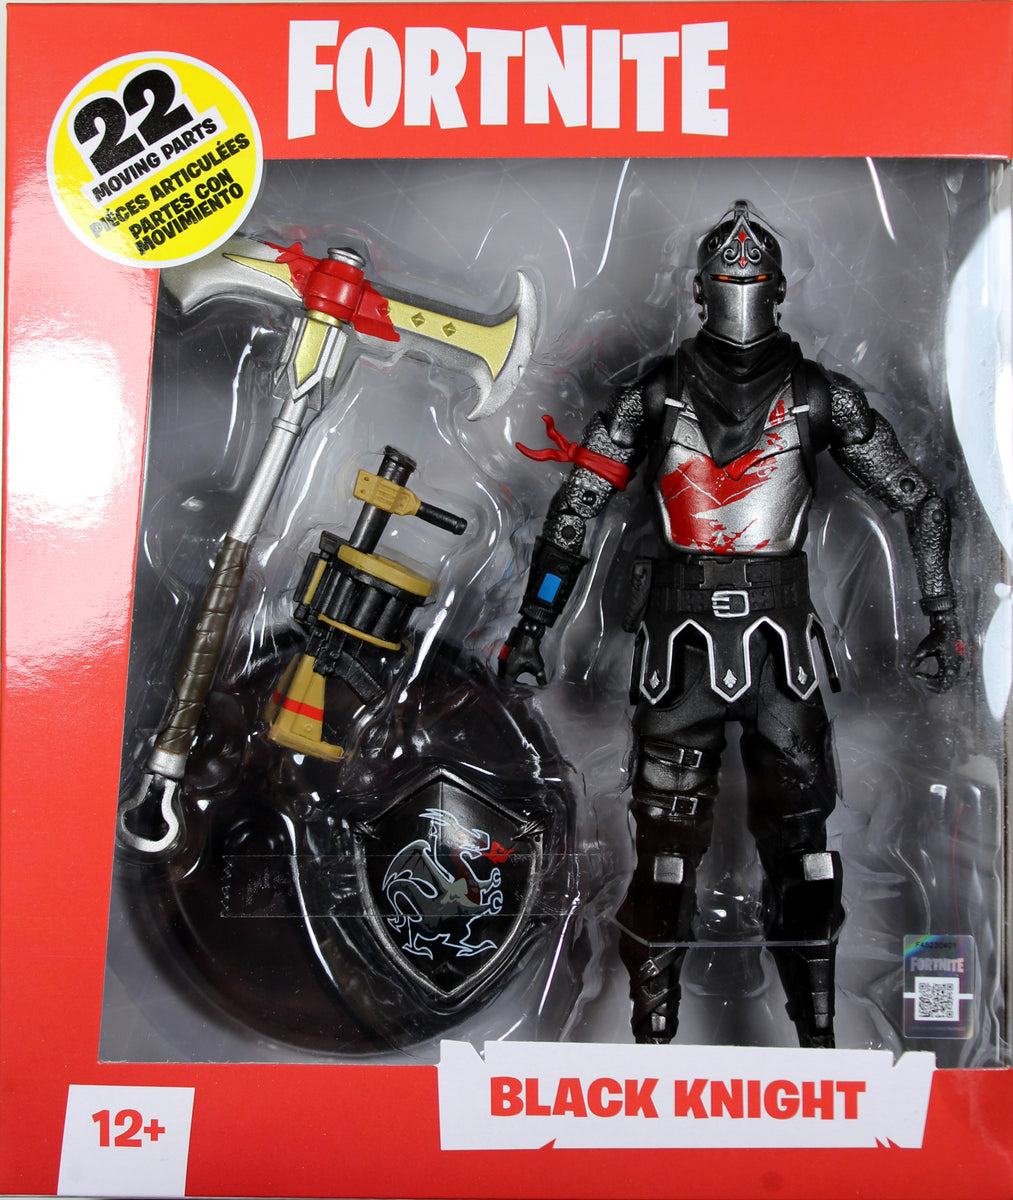 Fortnite ~ BLACK KNIGHT DELUXE 7-INCH ACTION FIGURE ~ McFarlane Toys